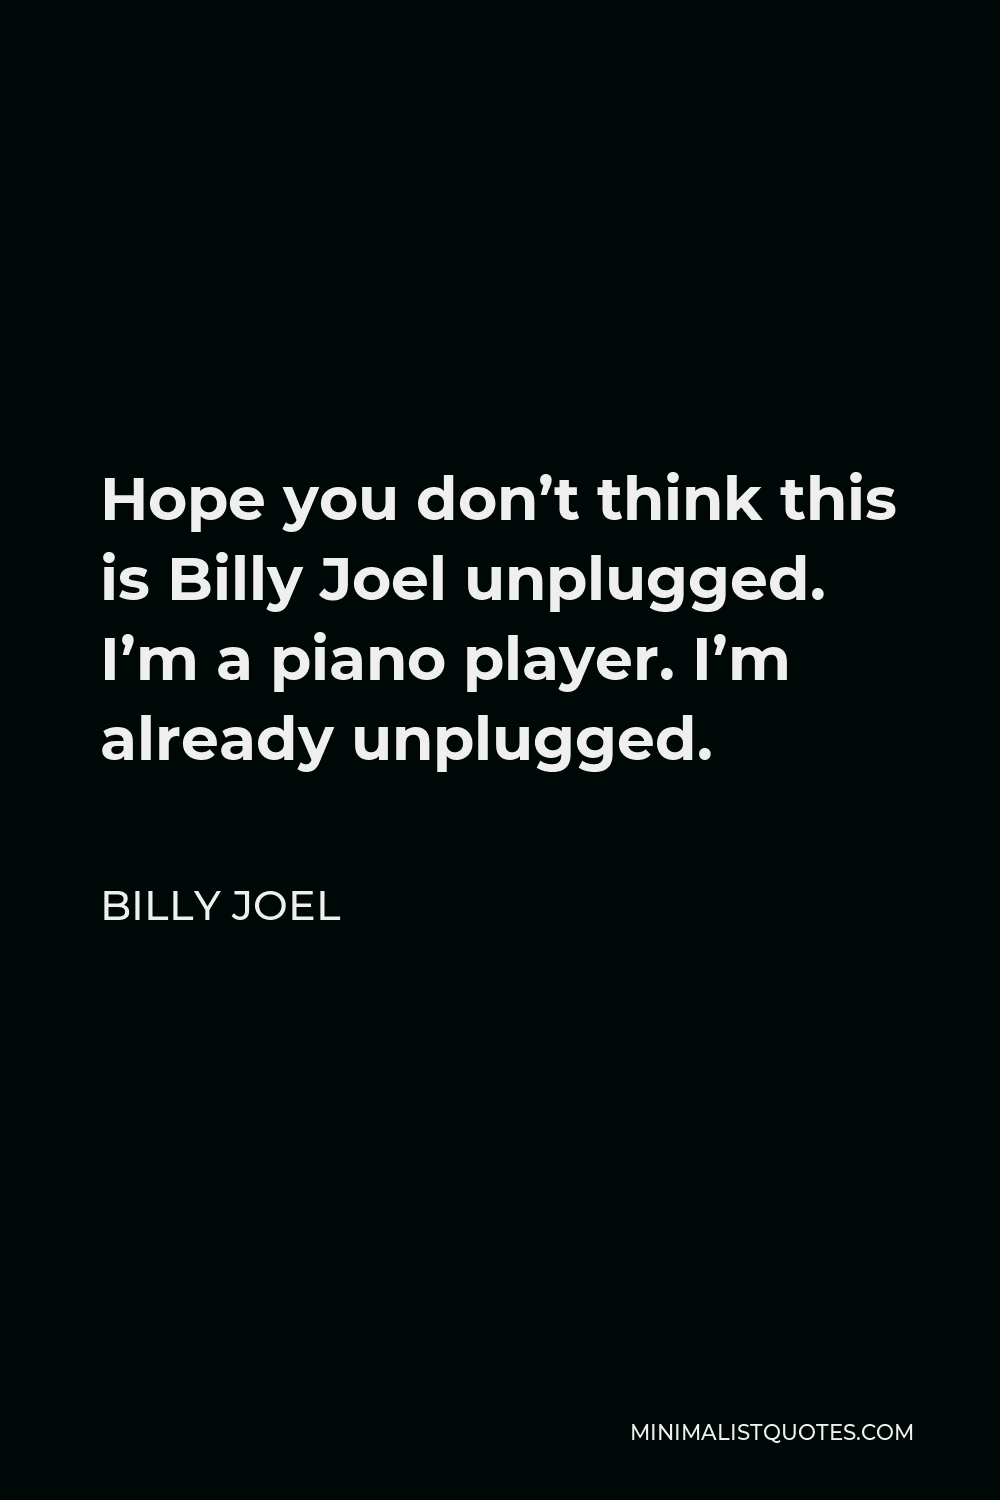 Billy Joel Quote - Hope you don’t think this is Billy Joel unplugged. I’m a piano player. I’m already unplugged.